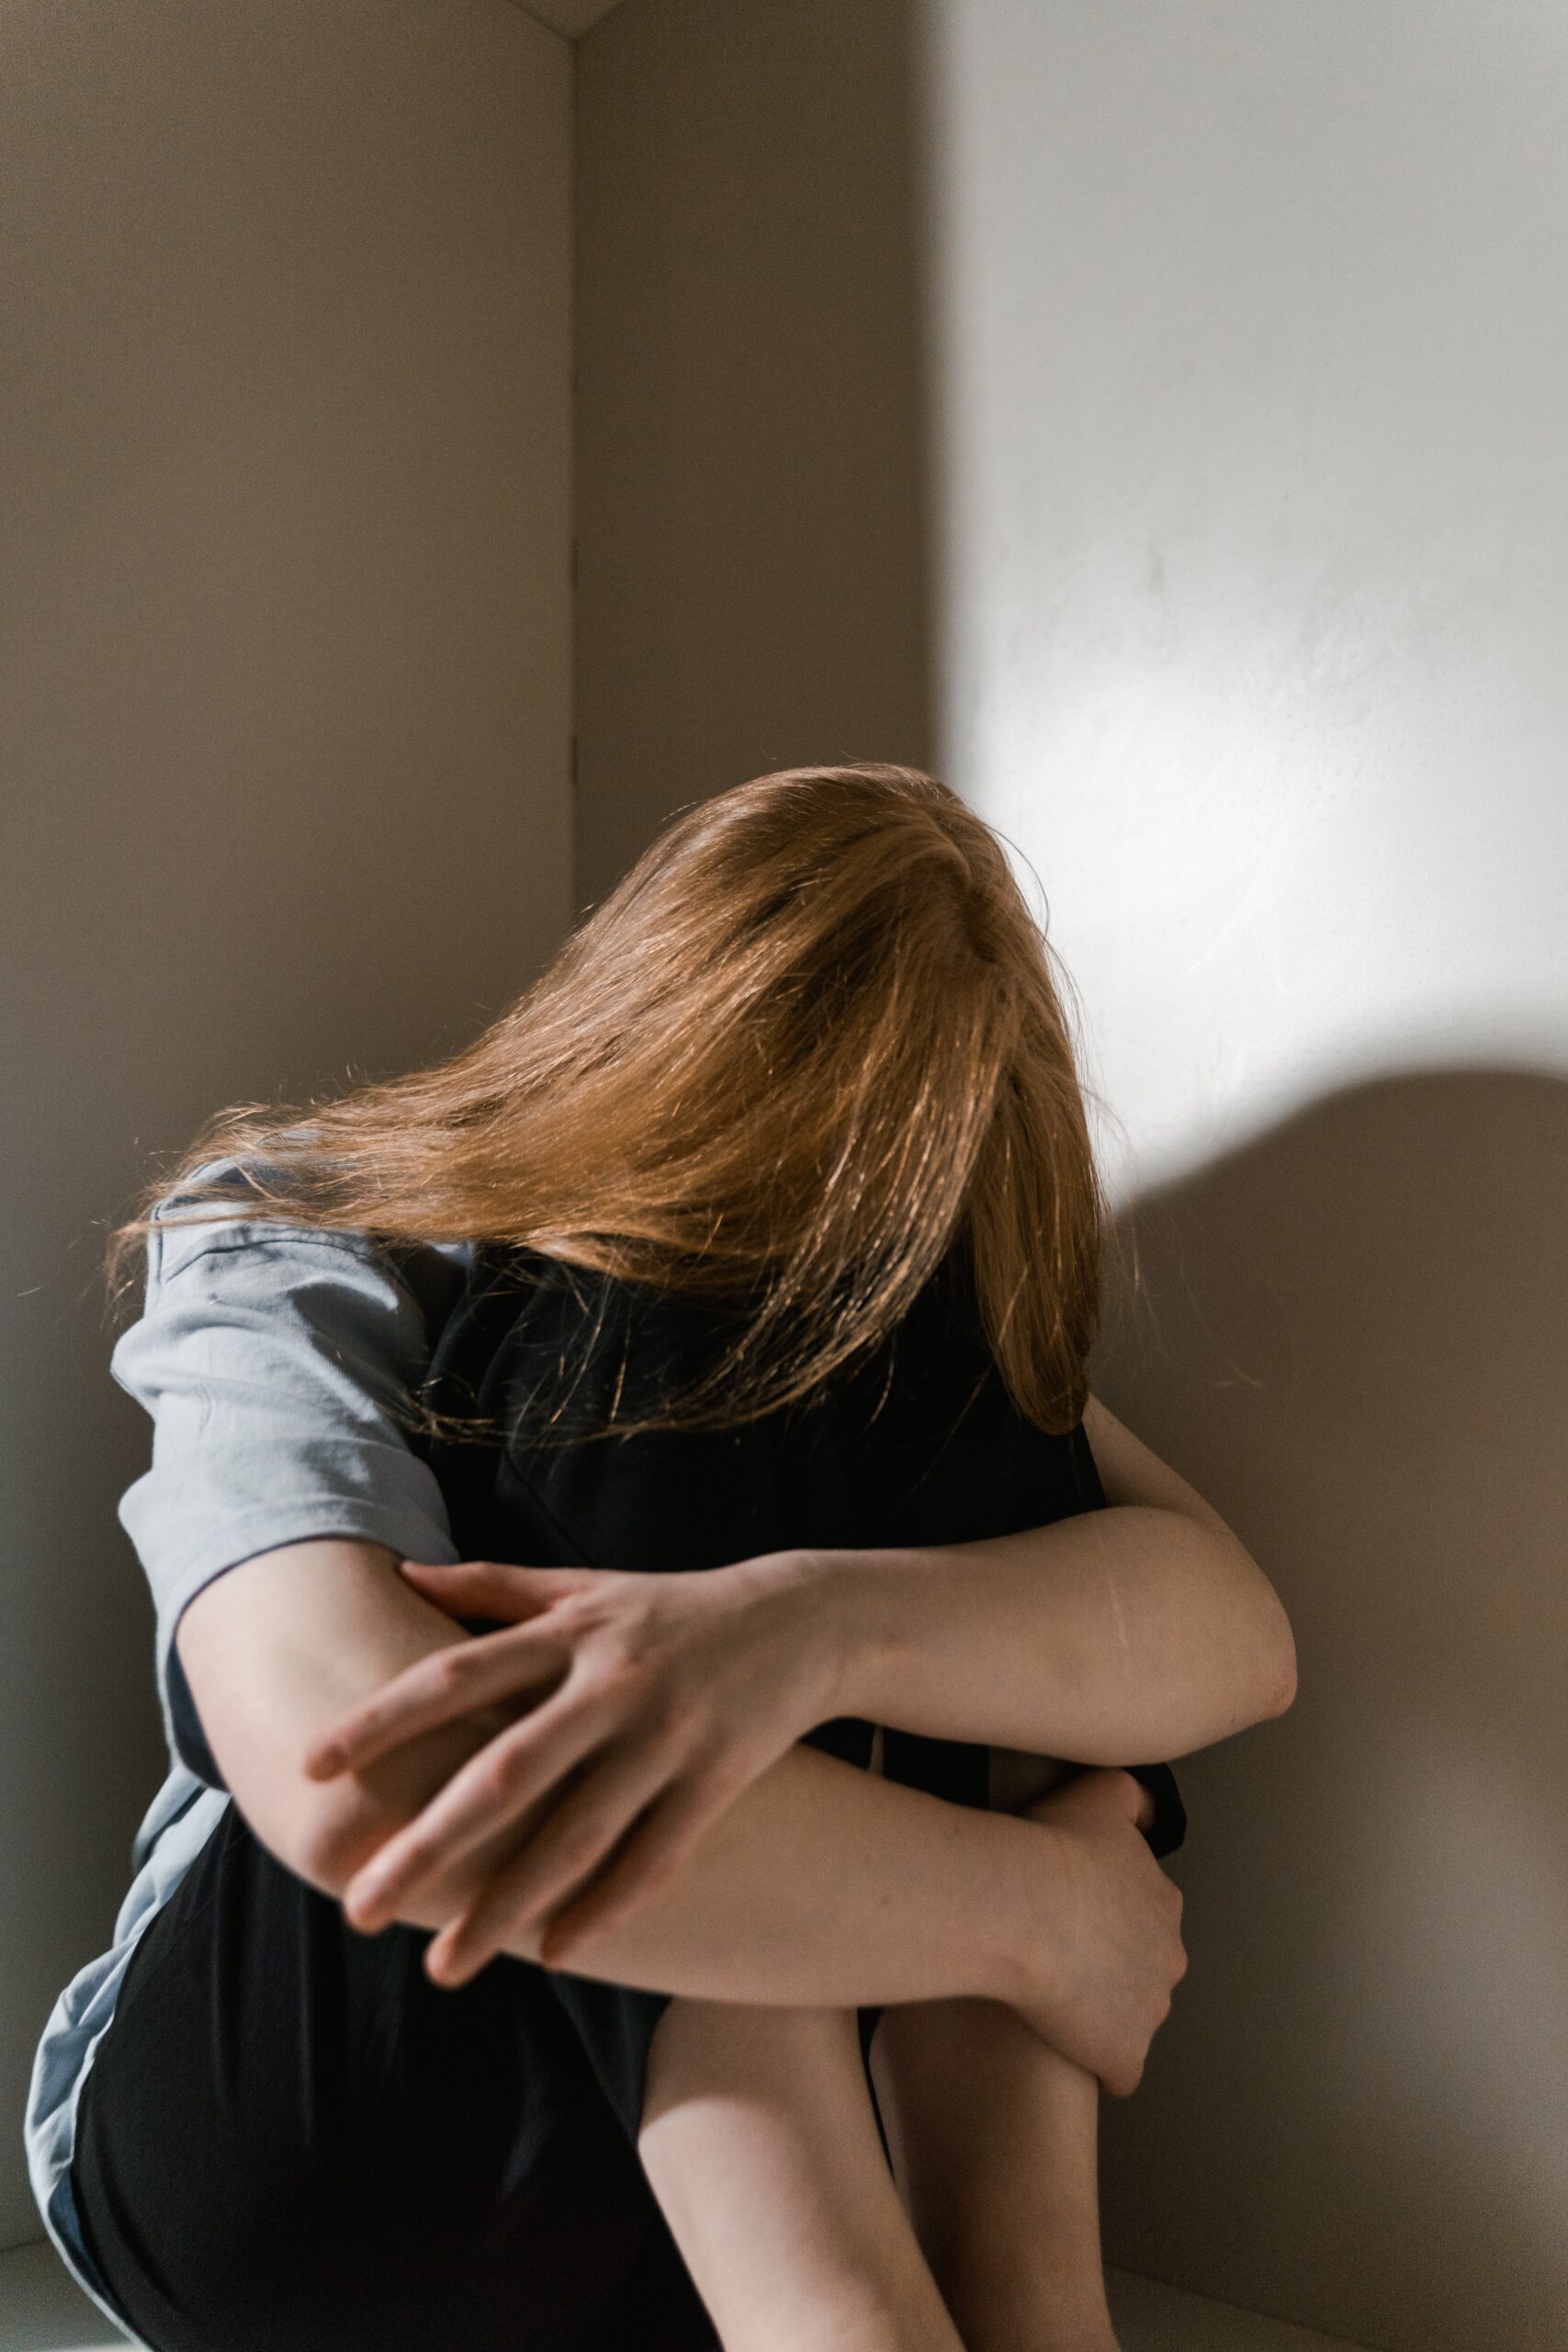 Your Child Has Suffered Sexual Abuse It’s Time To Find a Qualified Abuse Lawyer